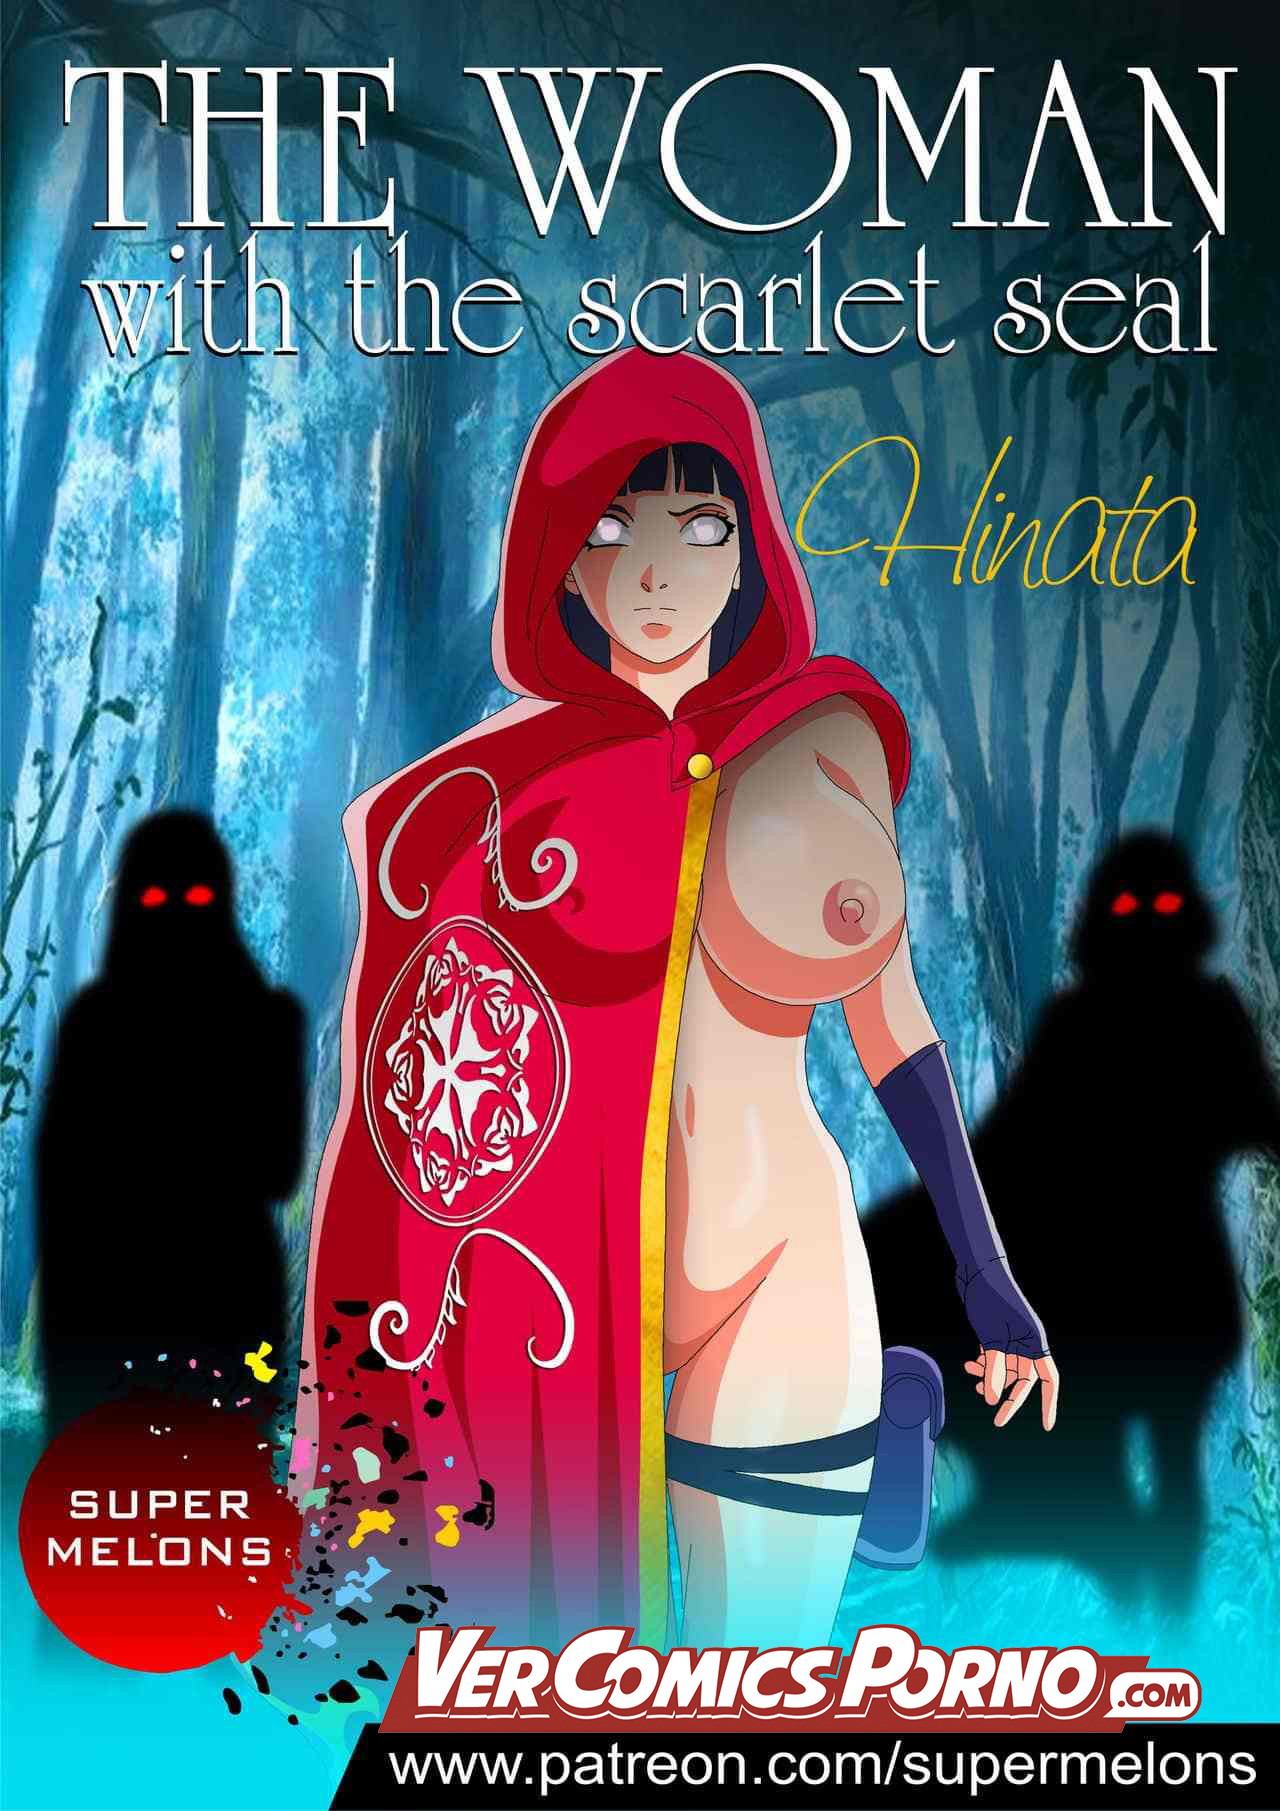 [Super Melons] The Woman with the Scarlet Seal (Traduccion Exclusiva) - 0